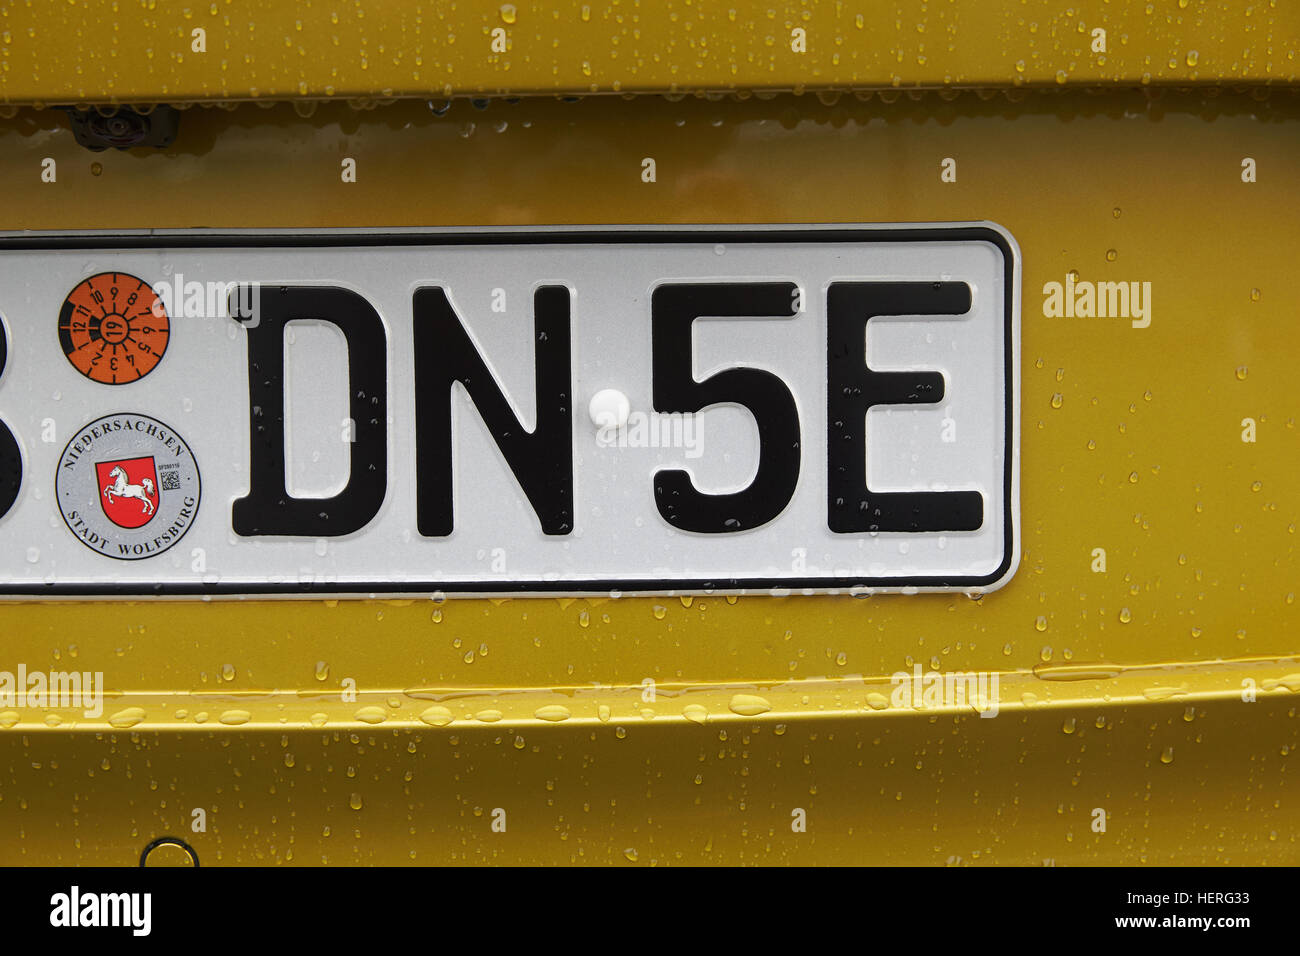 License plate of electric car, Germany Stock Photo